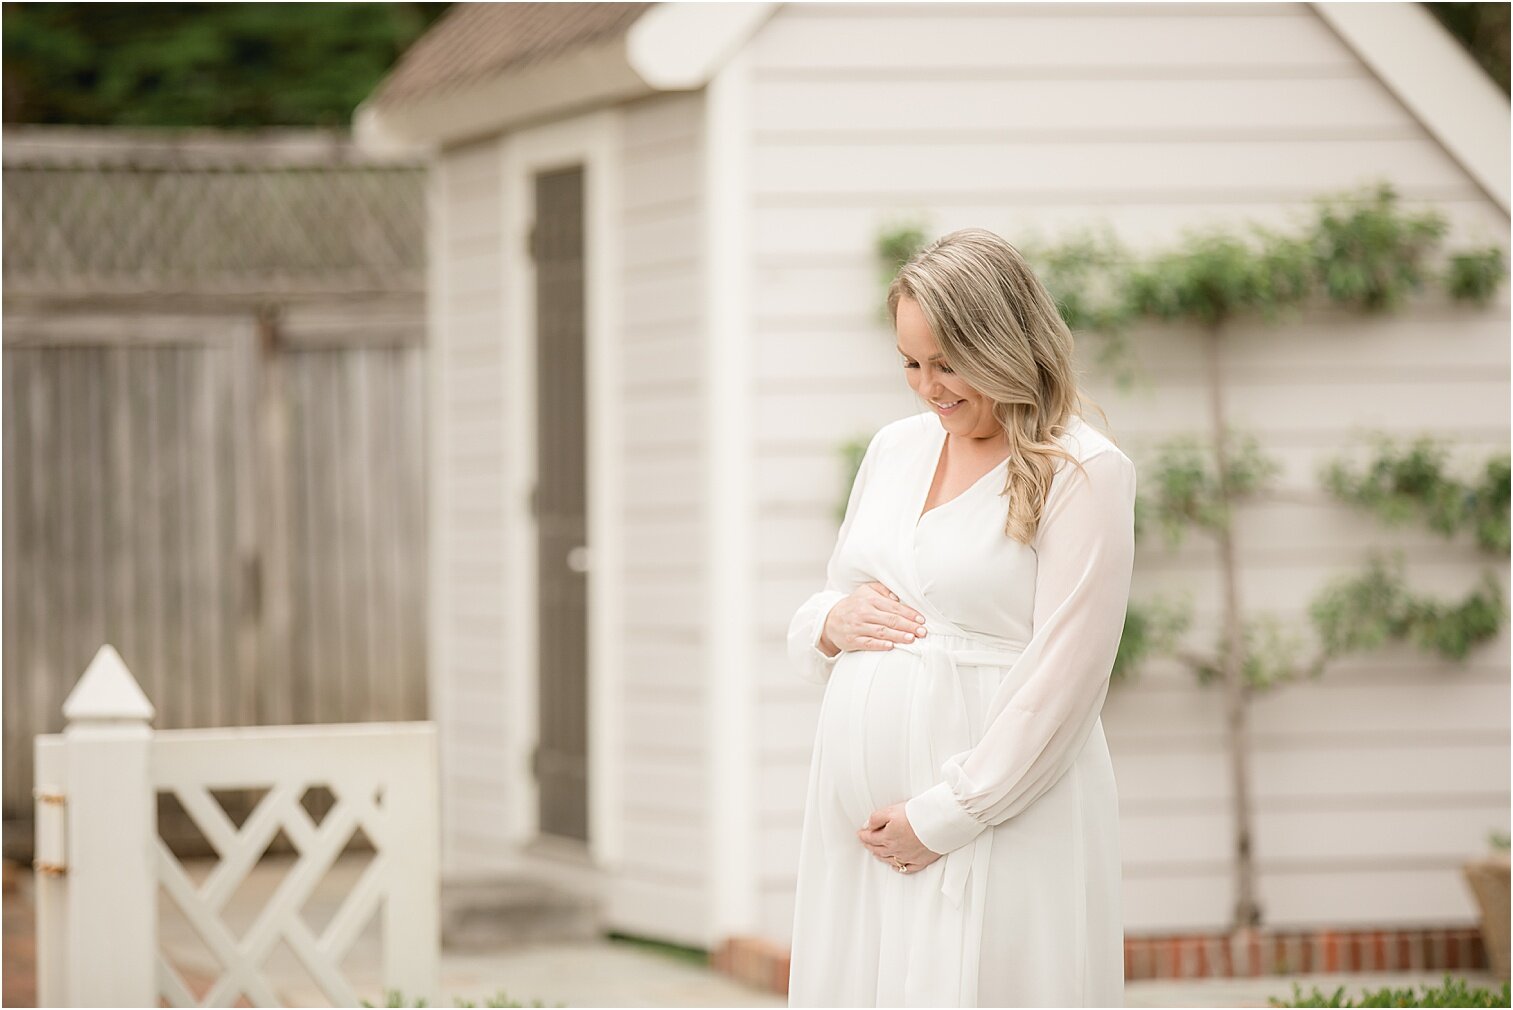 Maternity Photography by Angie Lansdon Photography 00007.jpg